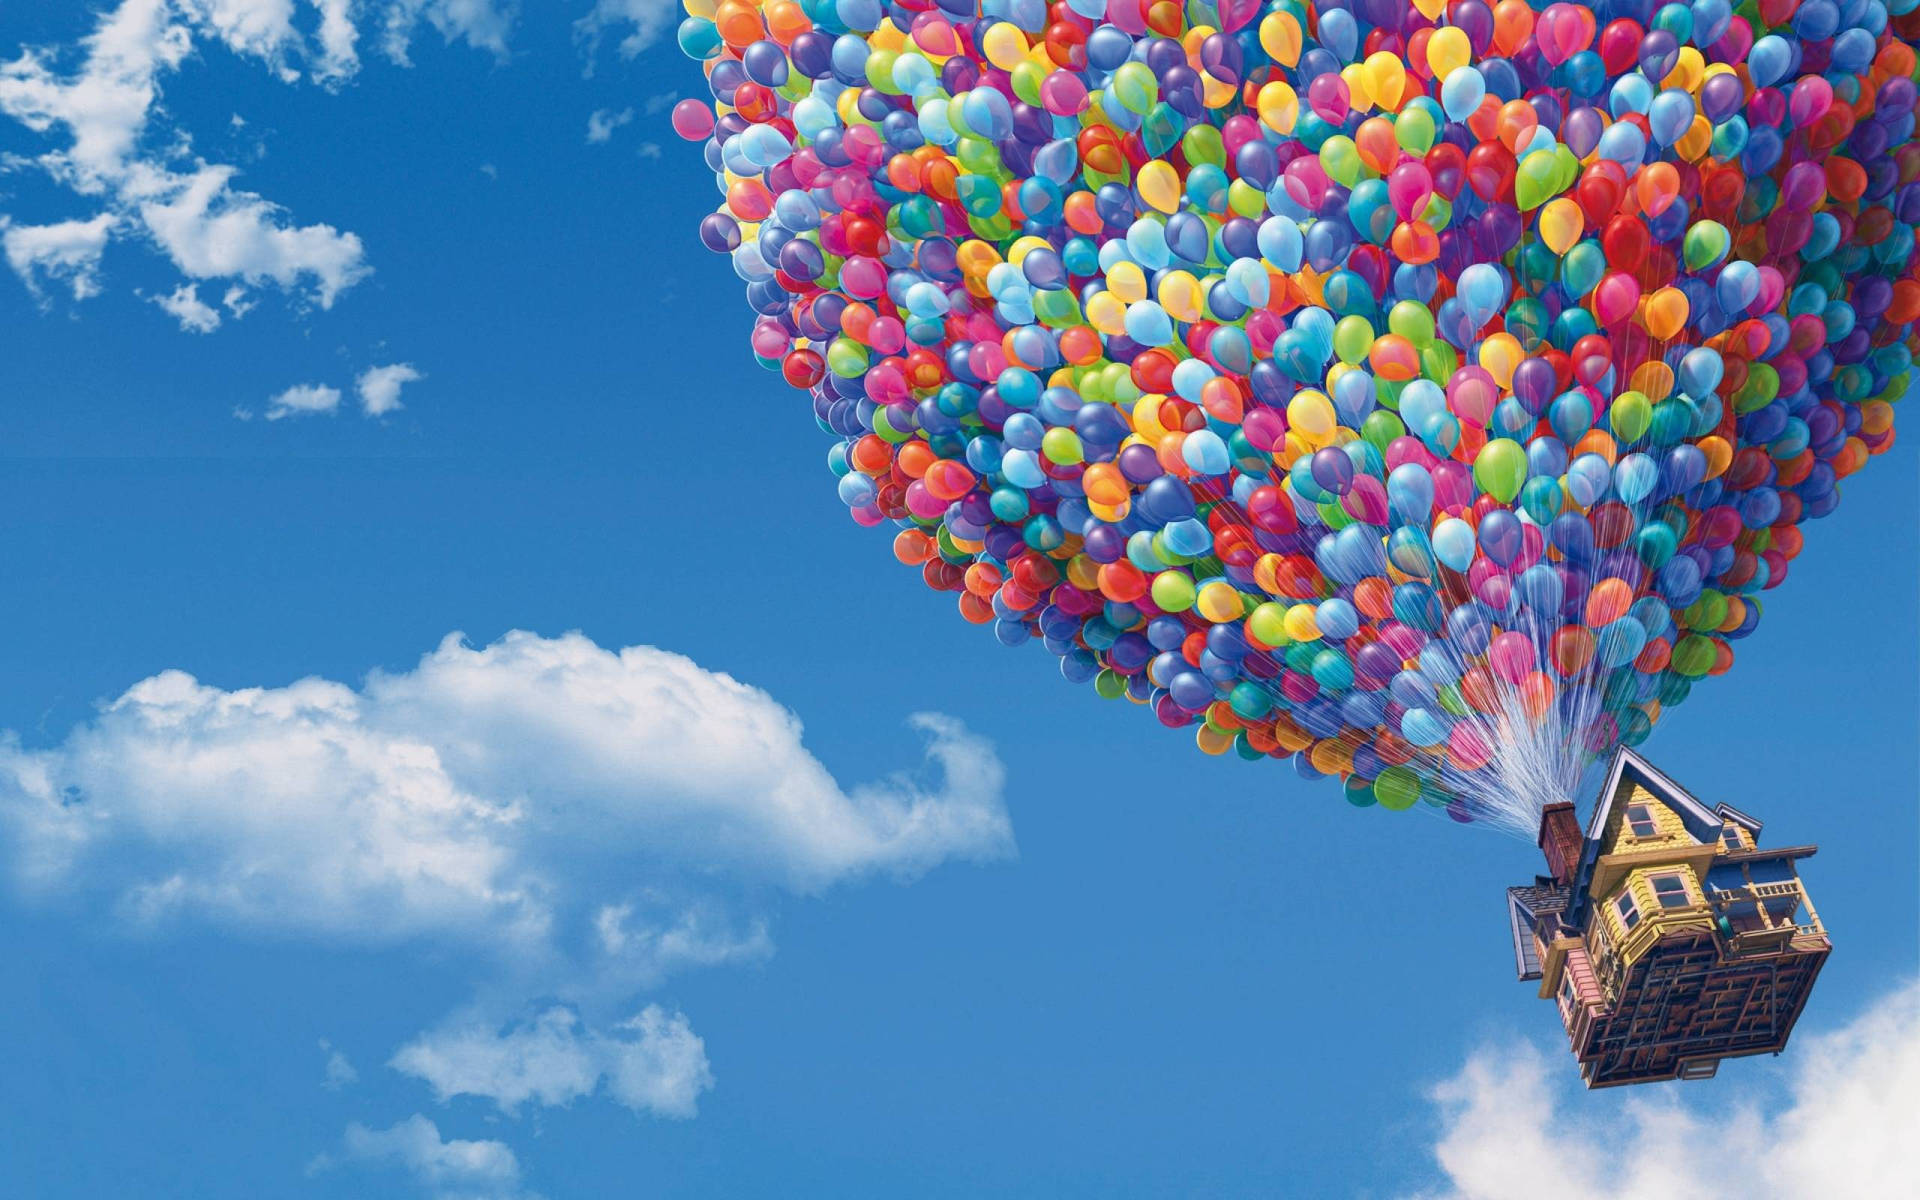 Capturing the imagination of all ages, Disney brings the beloved classic, Up, to life. Wallpaper